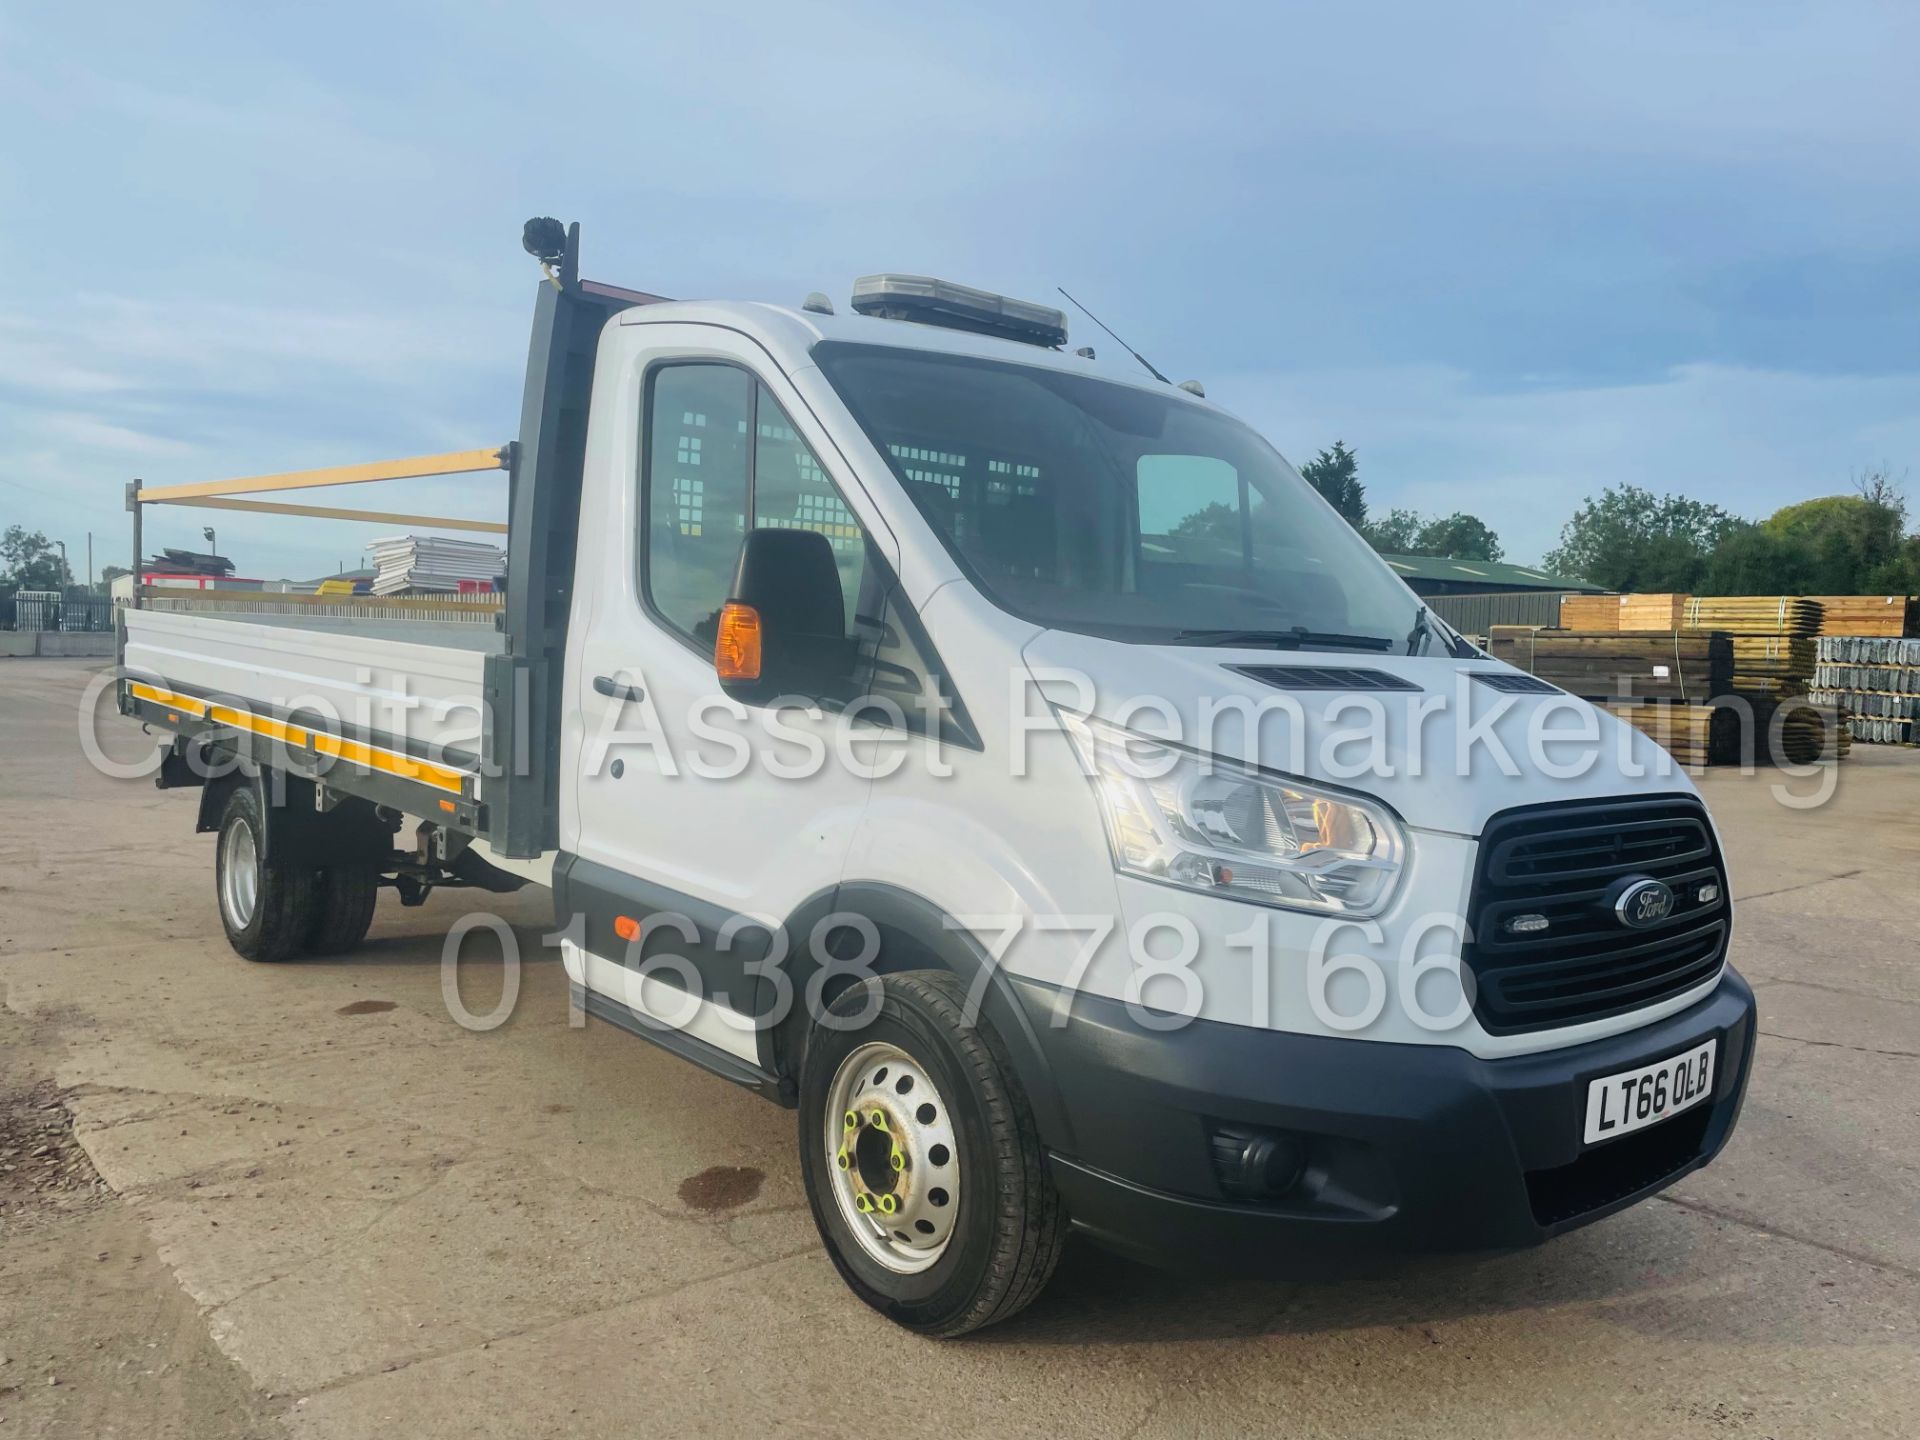 (On Sale) FORD TRANSIT 125 T350 *L4 - XLWB DROPSIDE TRUCK* (2017 - EURO 6) '2.2 TDCI - 6 SPEED' - Image 3 of 40